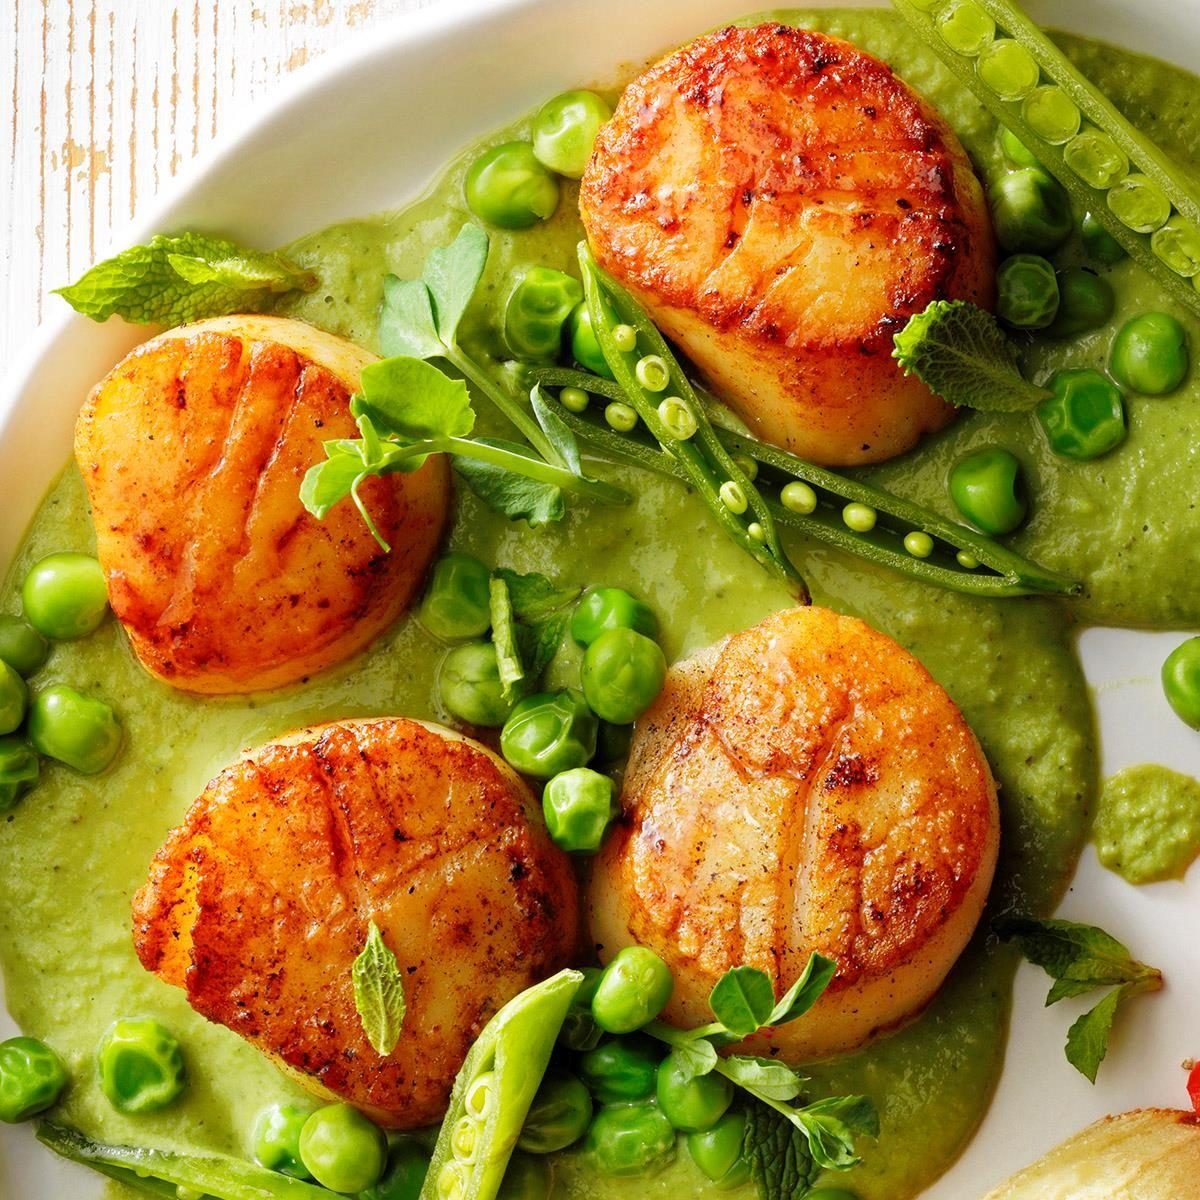 Seared Scallops With Minted Pea Puree Exps Toham23 164778 P2 Md 11 04 2b